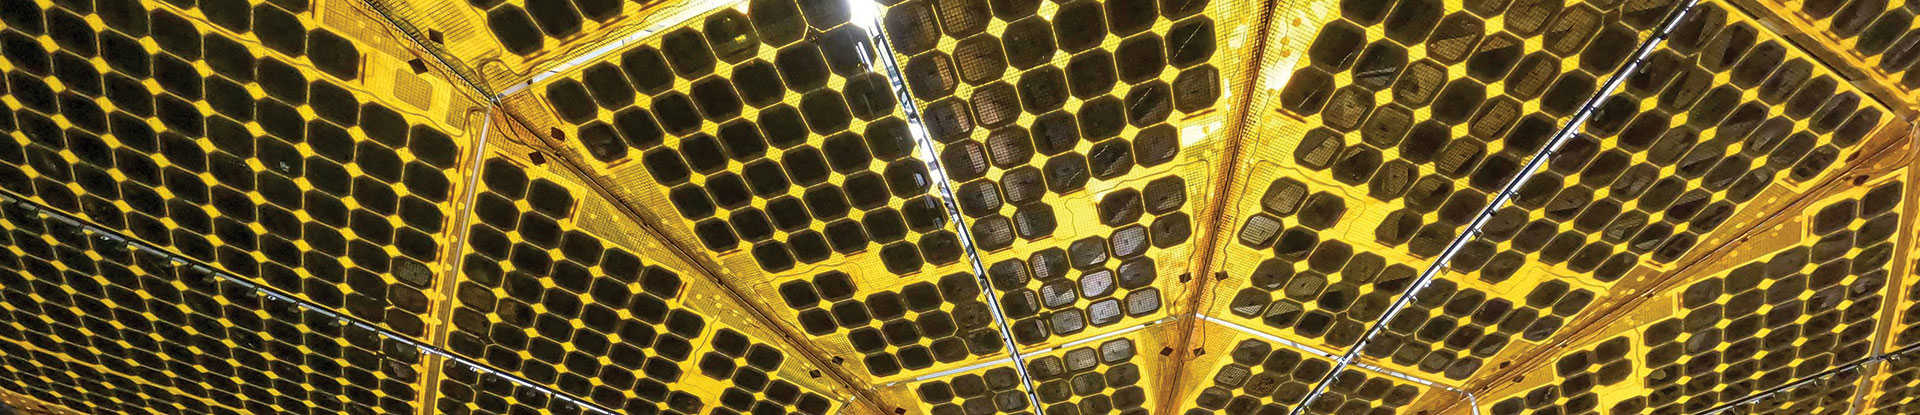 The underside of one of Lucy spacecraft's massive solar arrays in a thermal vacuum chamber